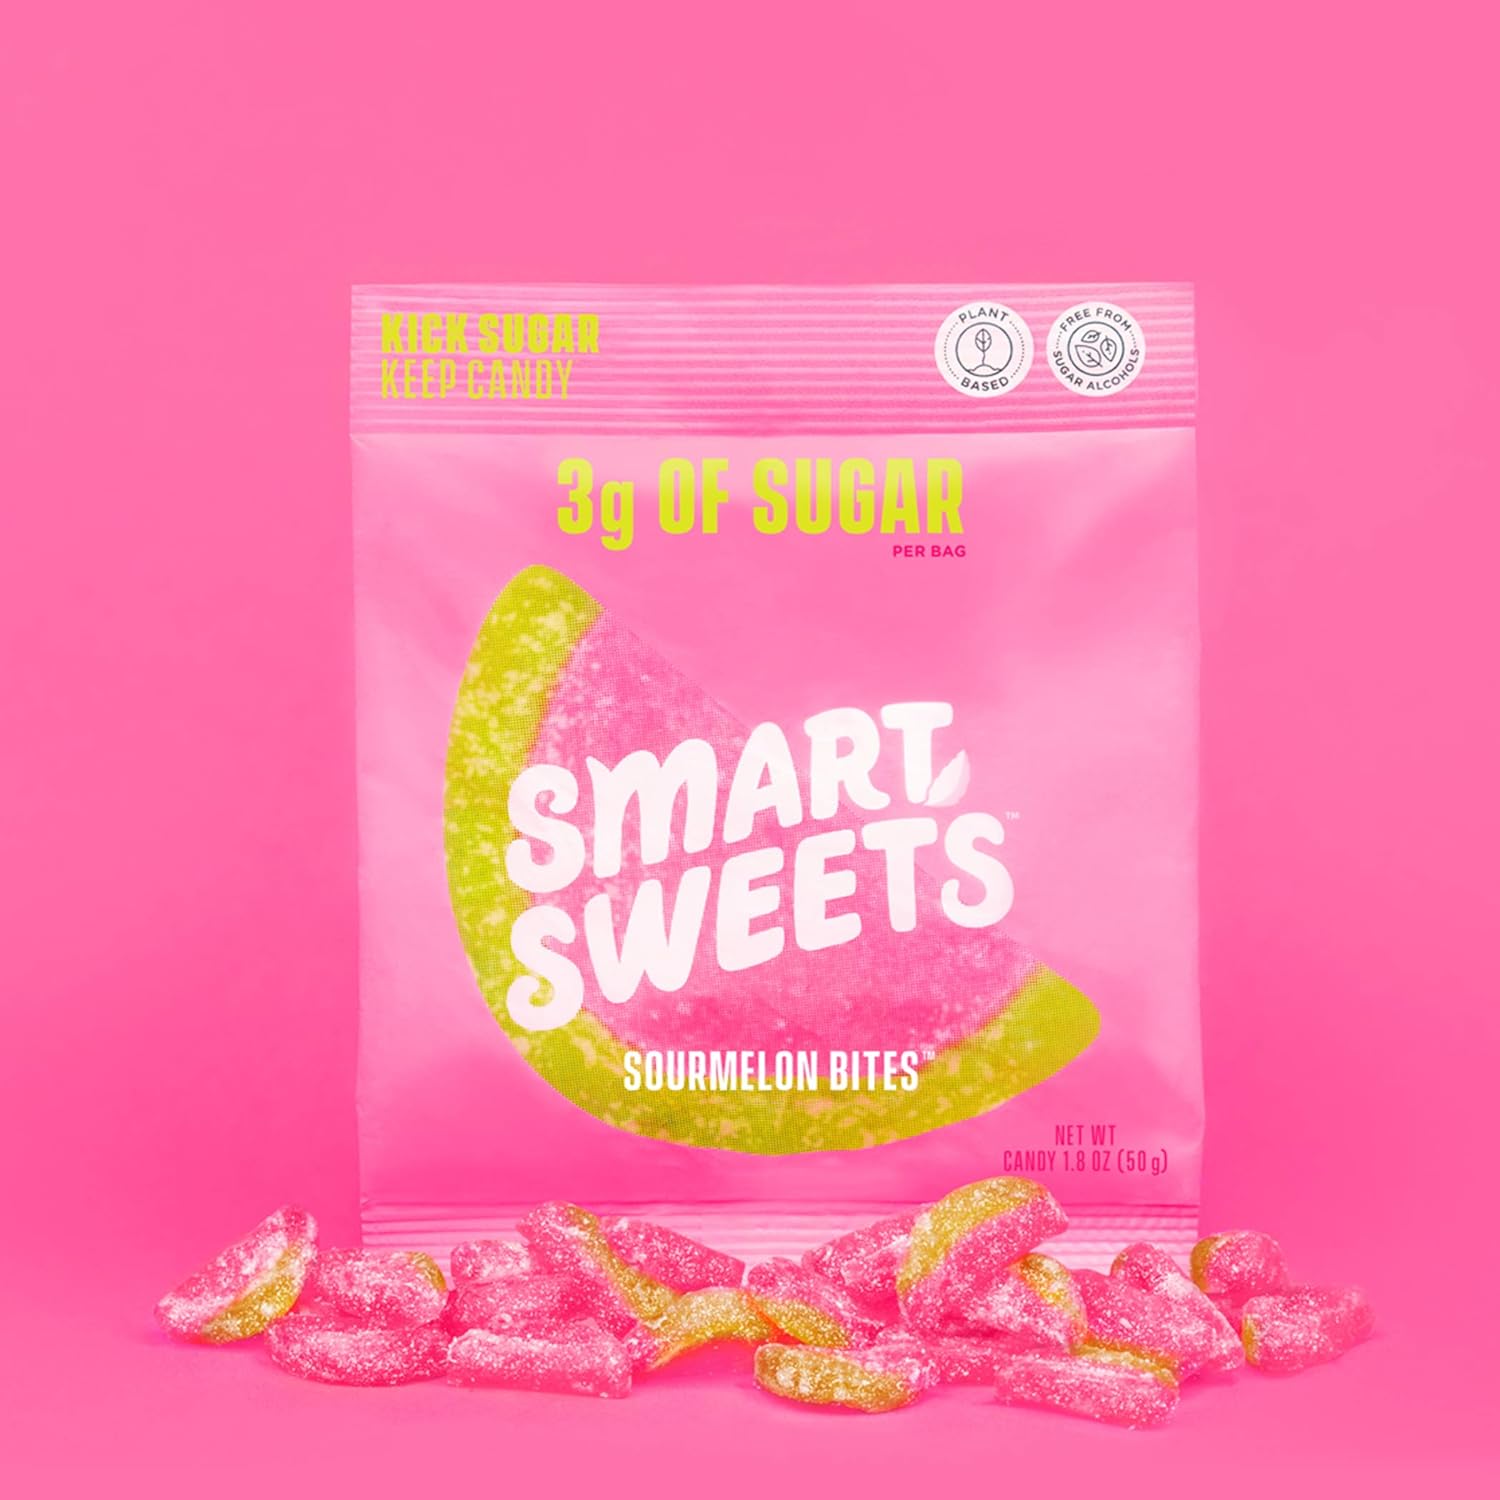  NEW SmartSweets Sourmelon Bites, Candy with Low Sugar (3g), Low Calorie, Plant-Based, Free From Sugar Alcohols, No Artificial Colors or Sweeteners, Pack of 6